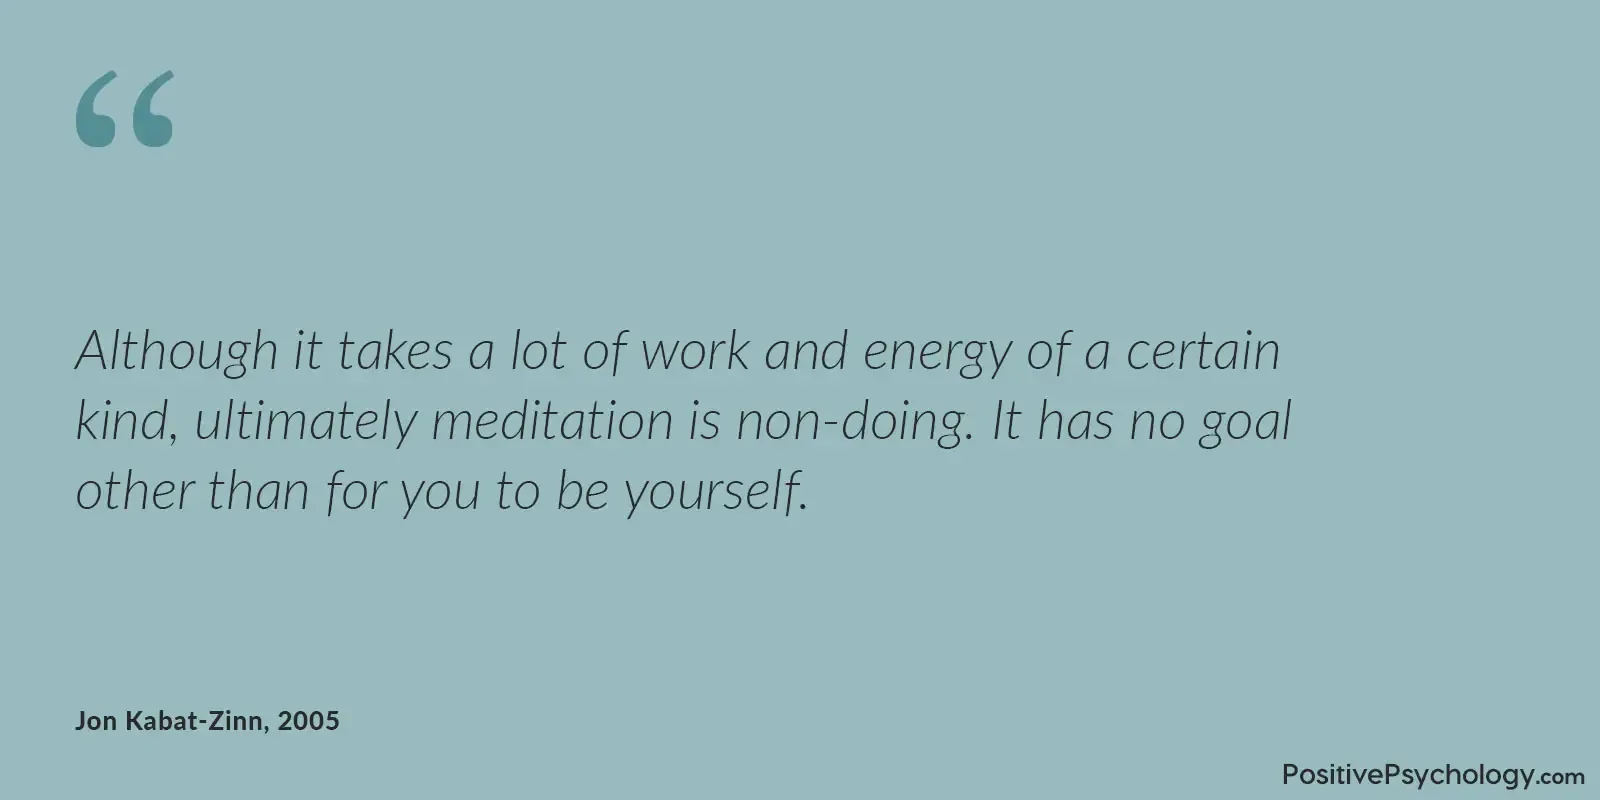 Meditation is non-doing